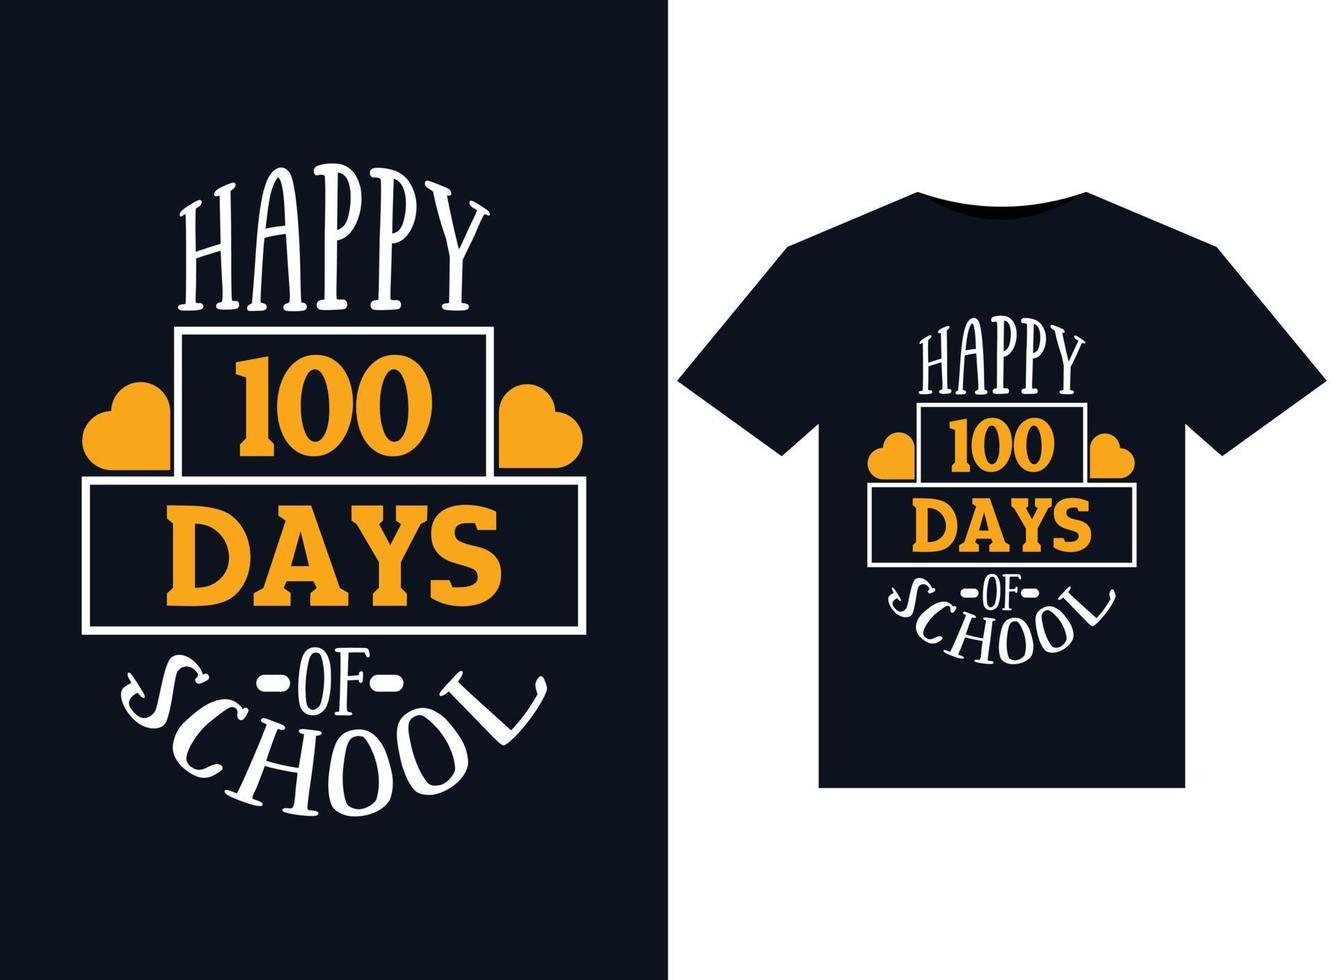 Happy 100 Days Of School illustrations for print-ready T-Shirts desig vector